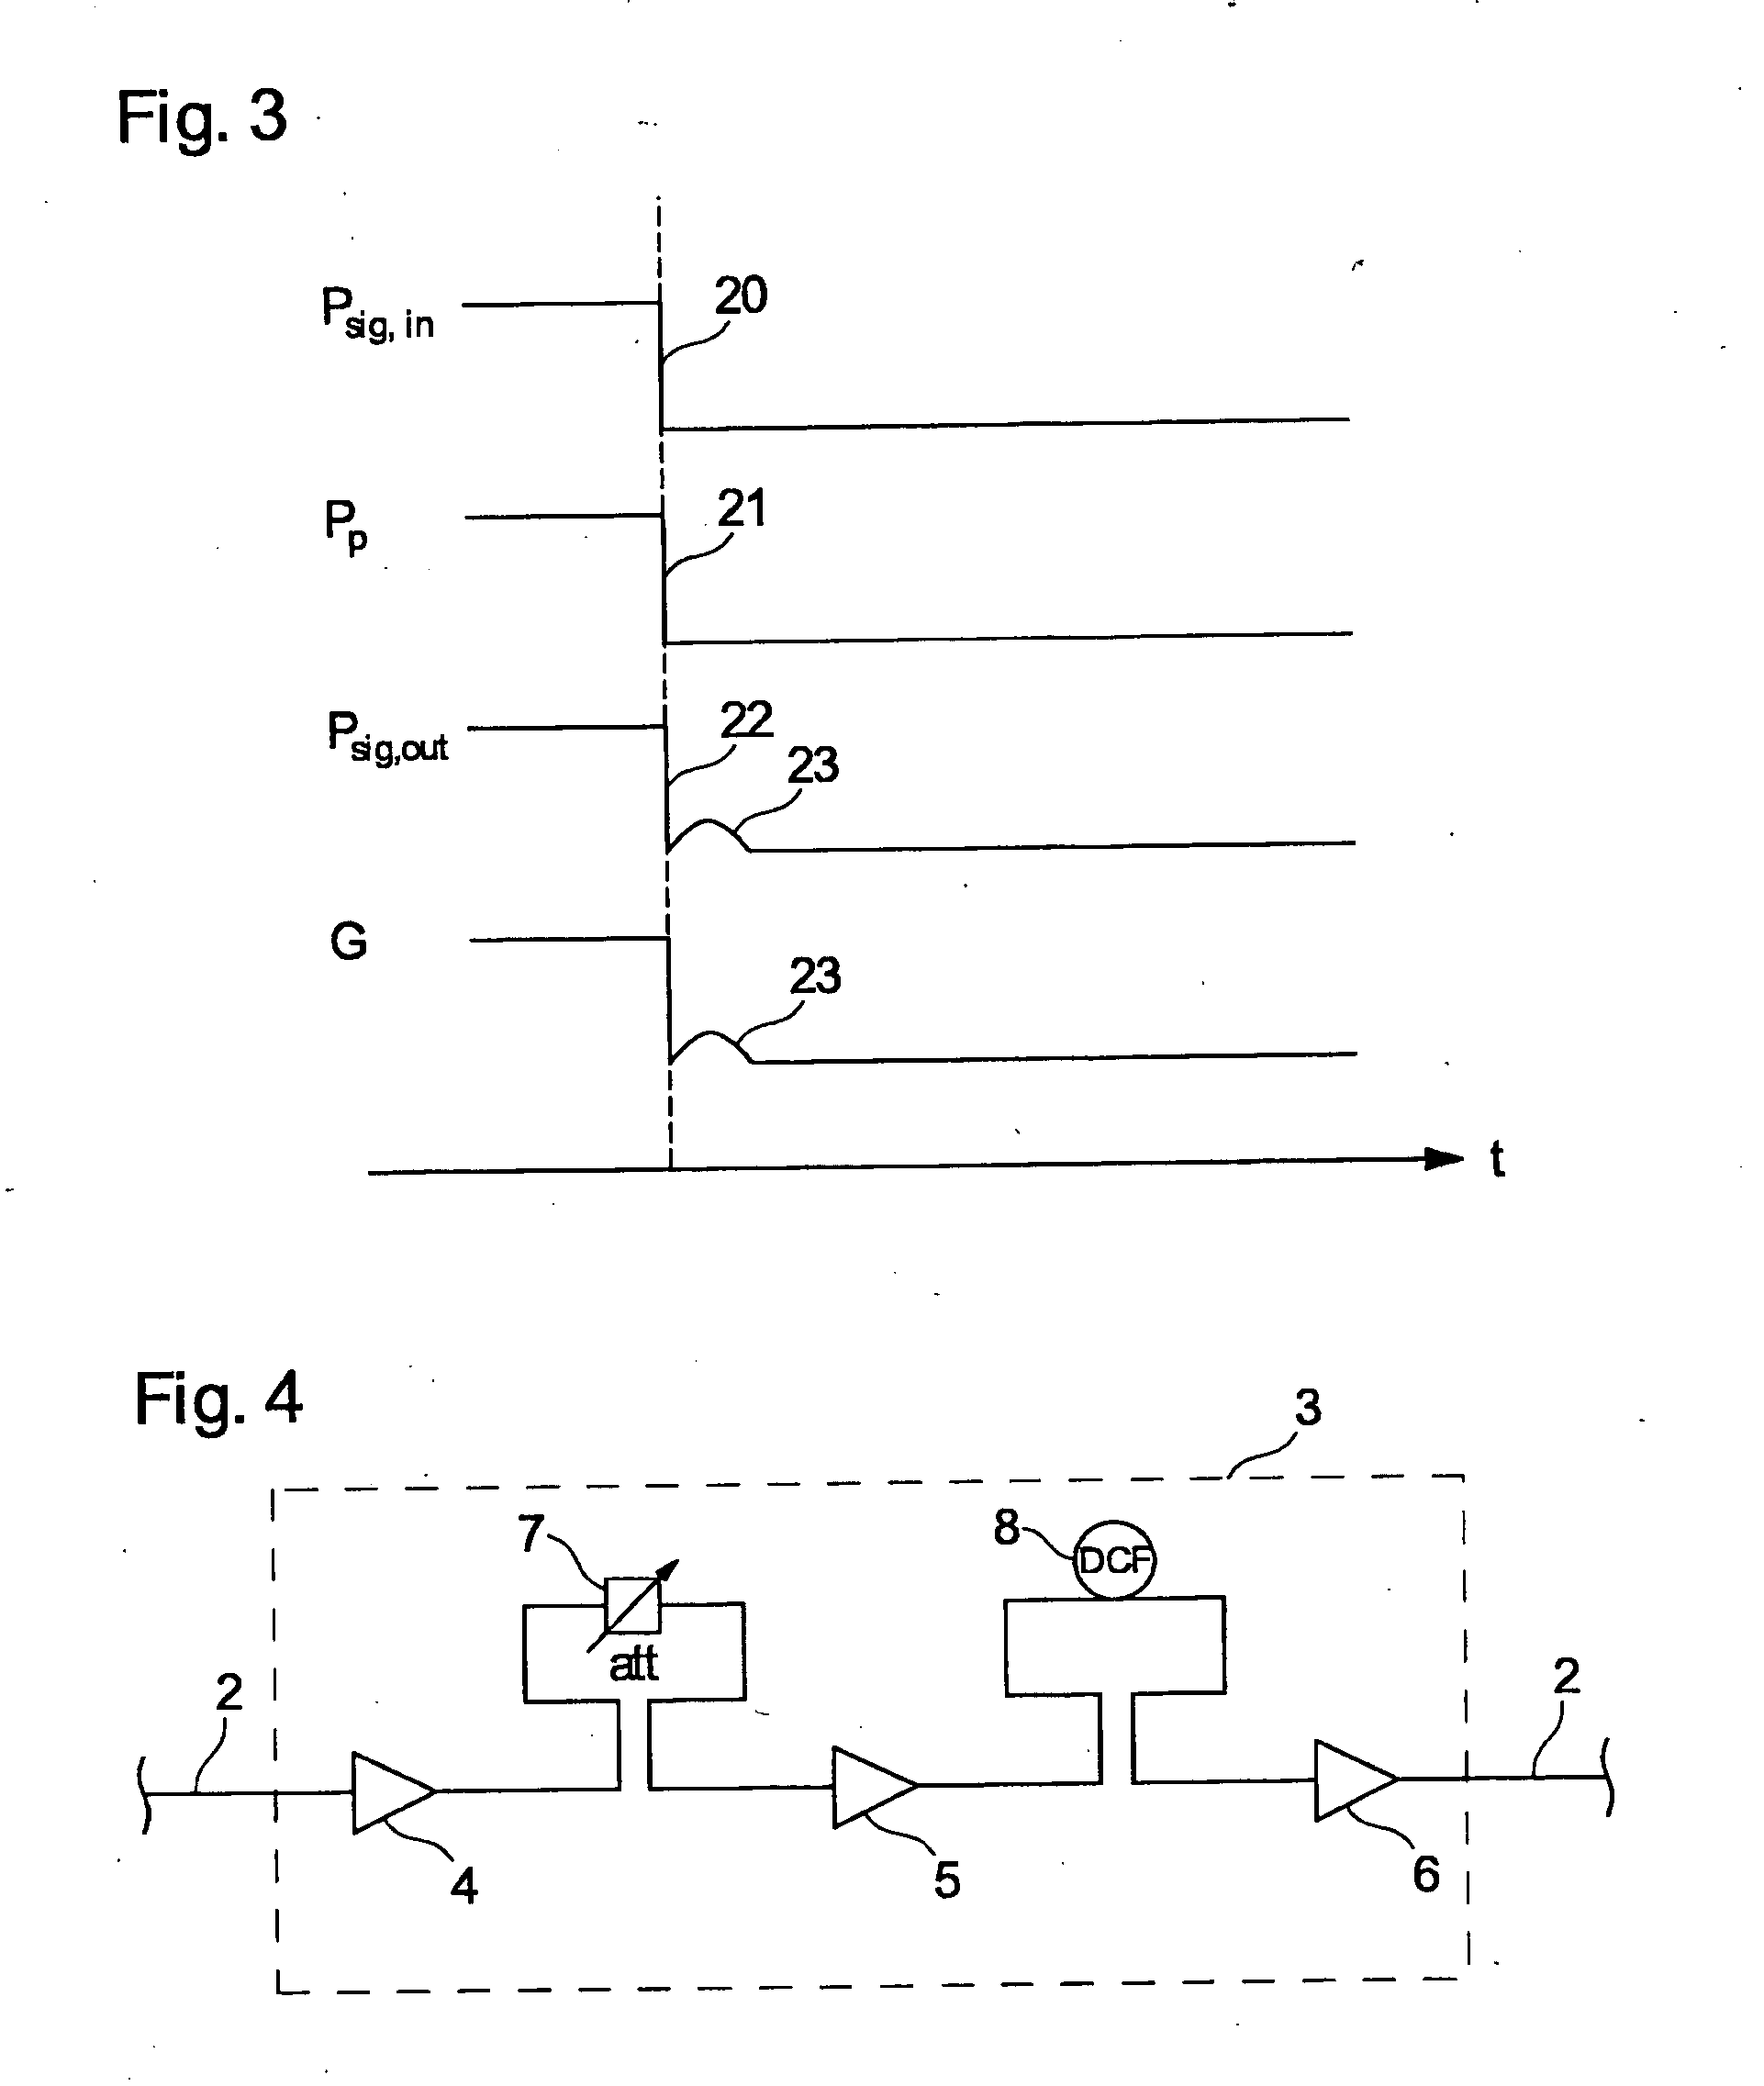 Compensation Of Gain Variations In A Multistage Optical Amplifier